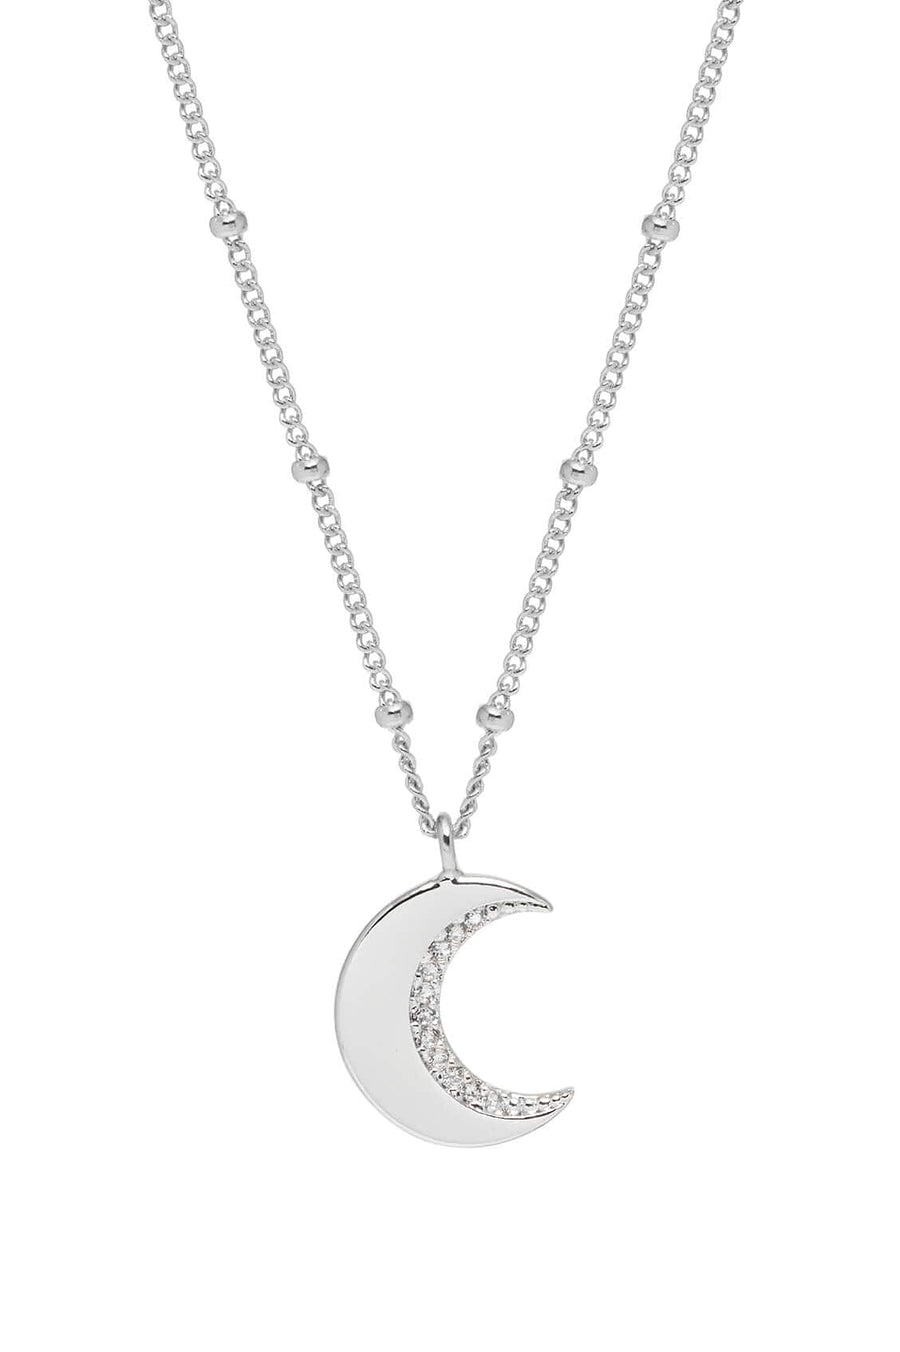 CZ Moon Necklace Silver Plated